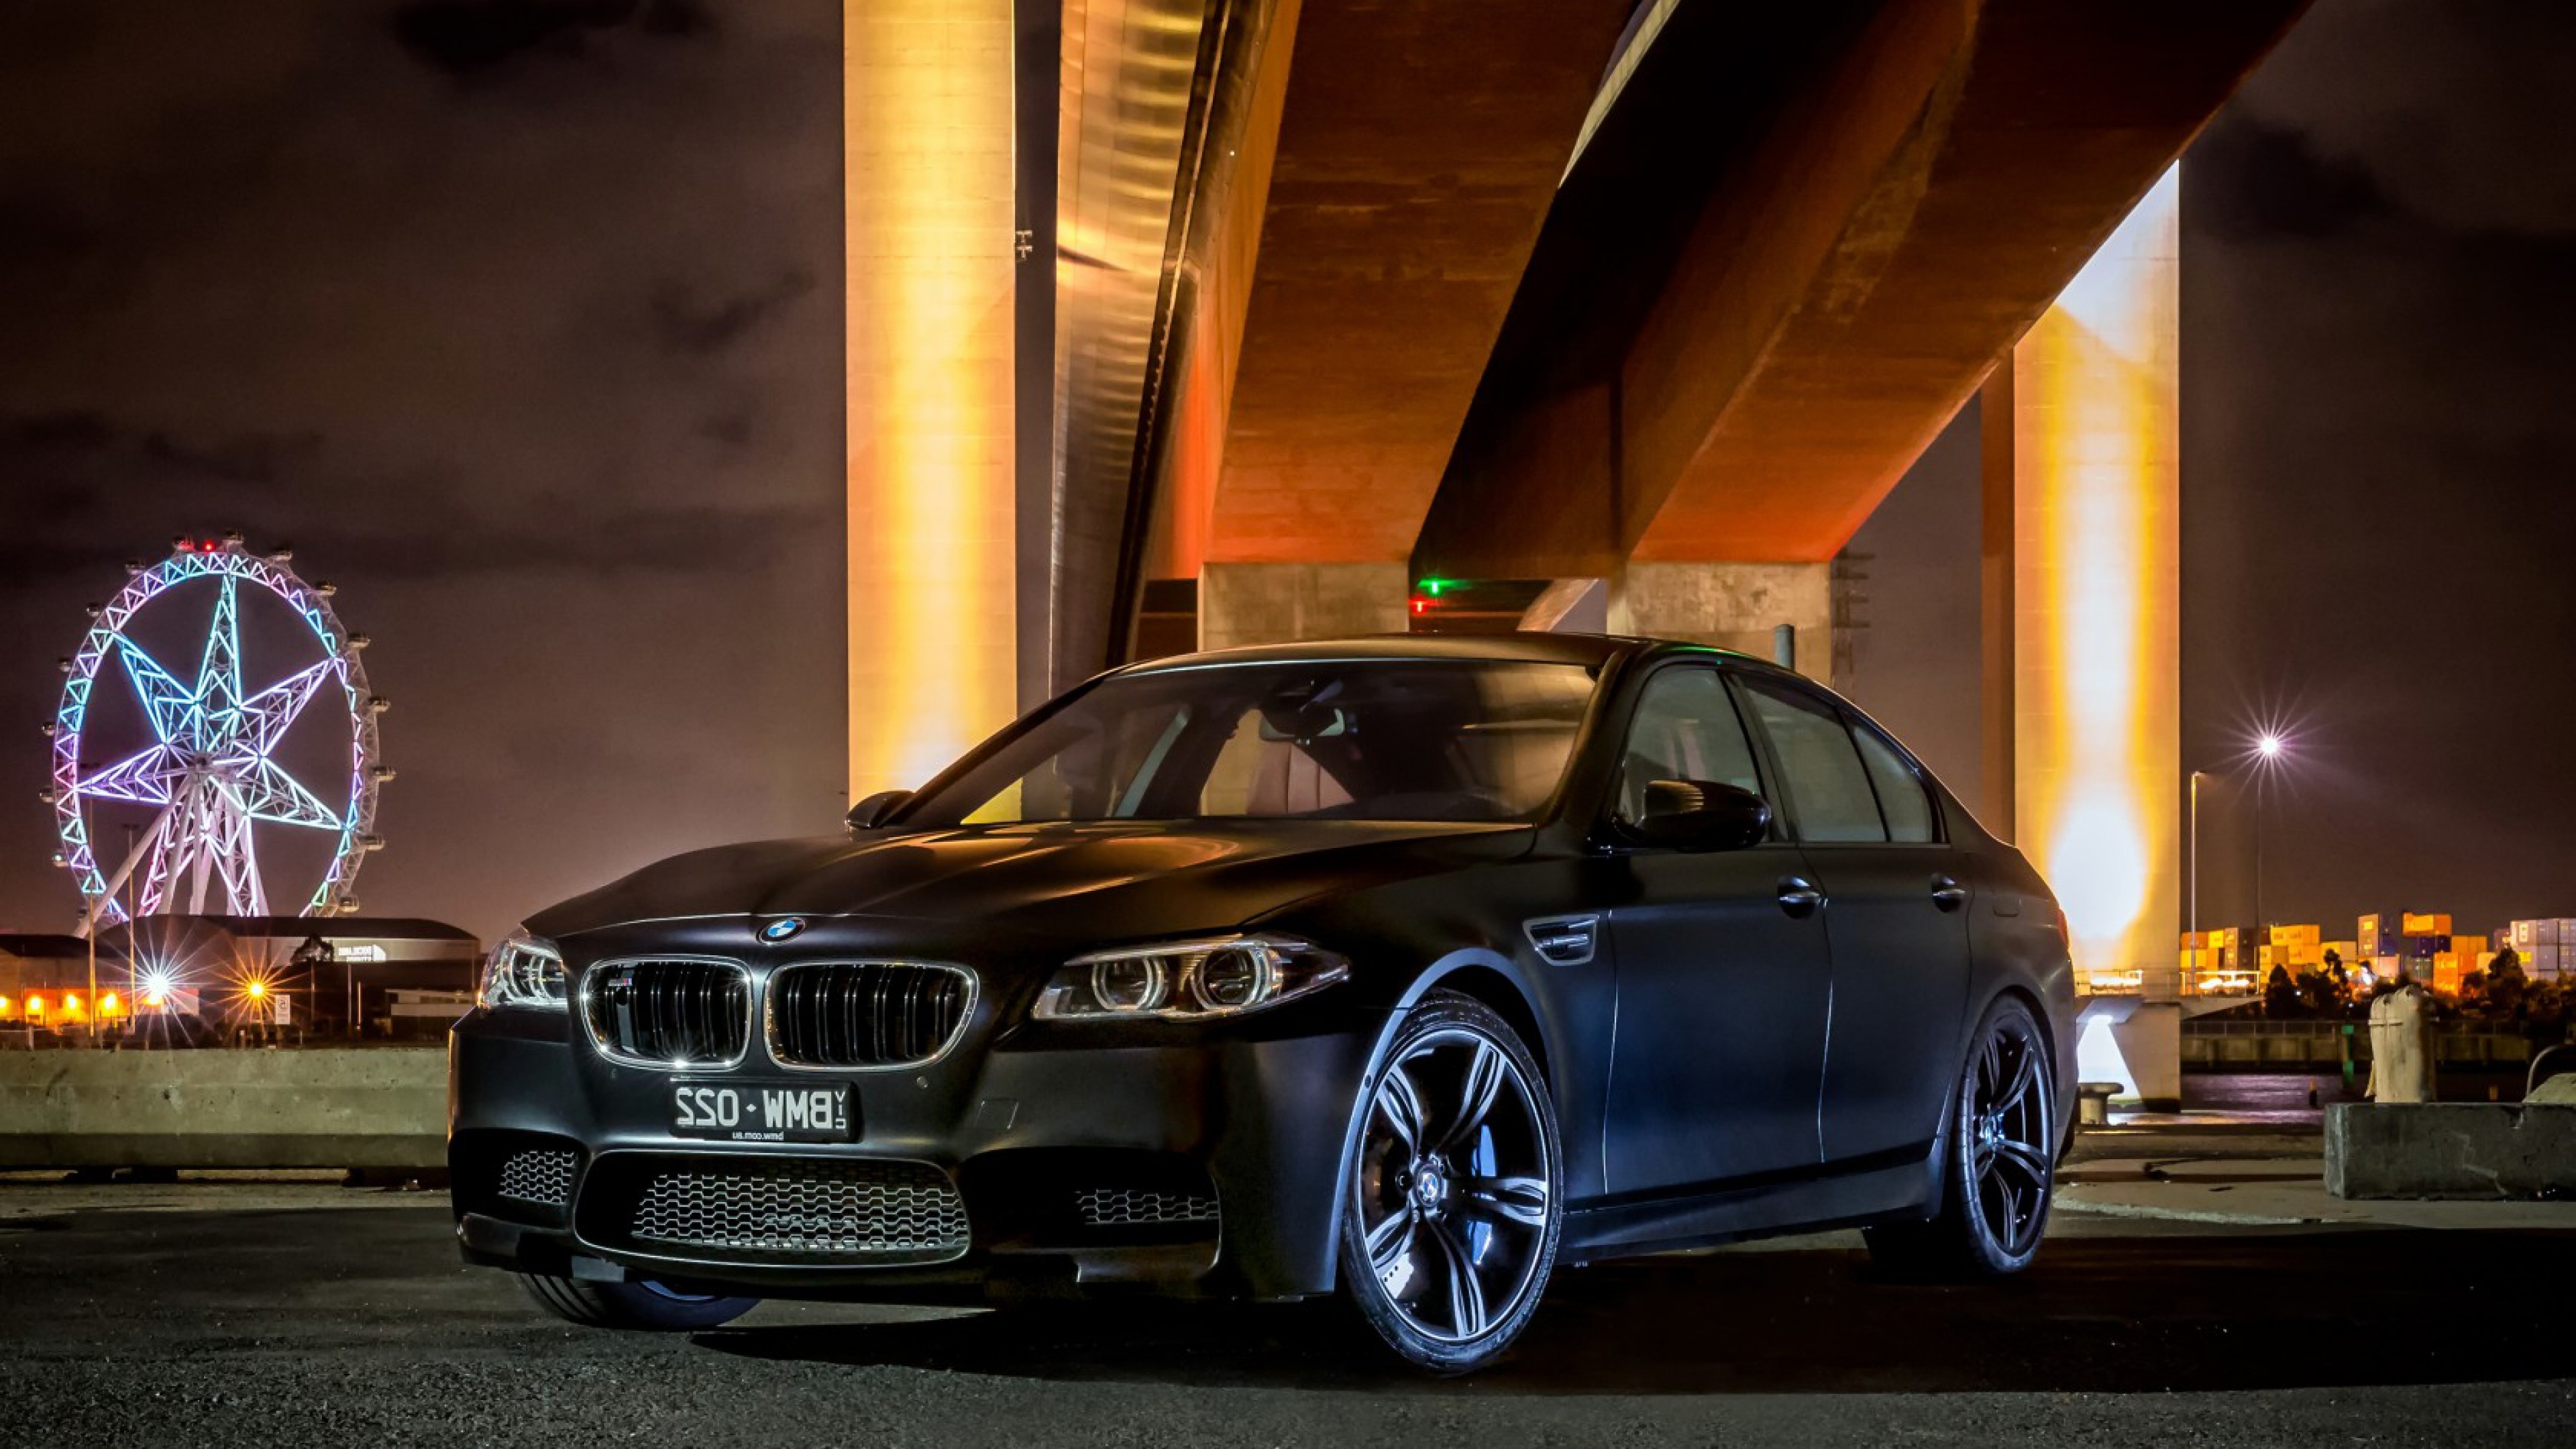 Bmw M5 Black 2, HD Cars, 4k Wallpapers, Images ...